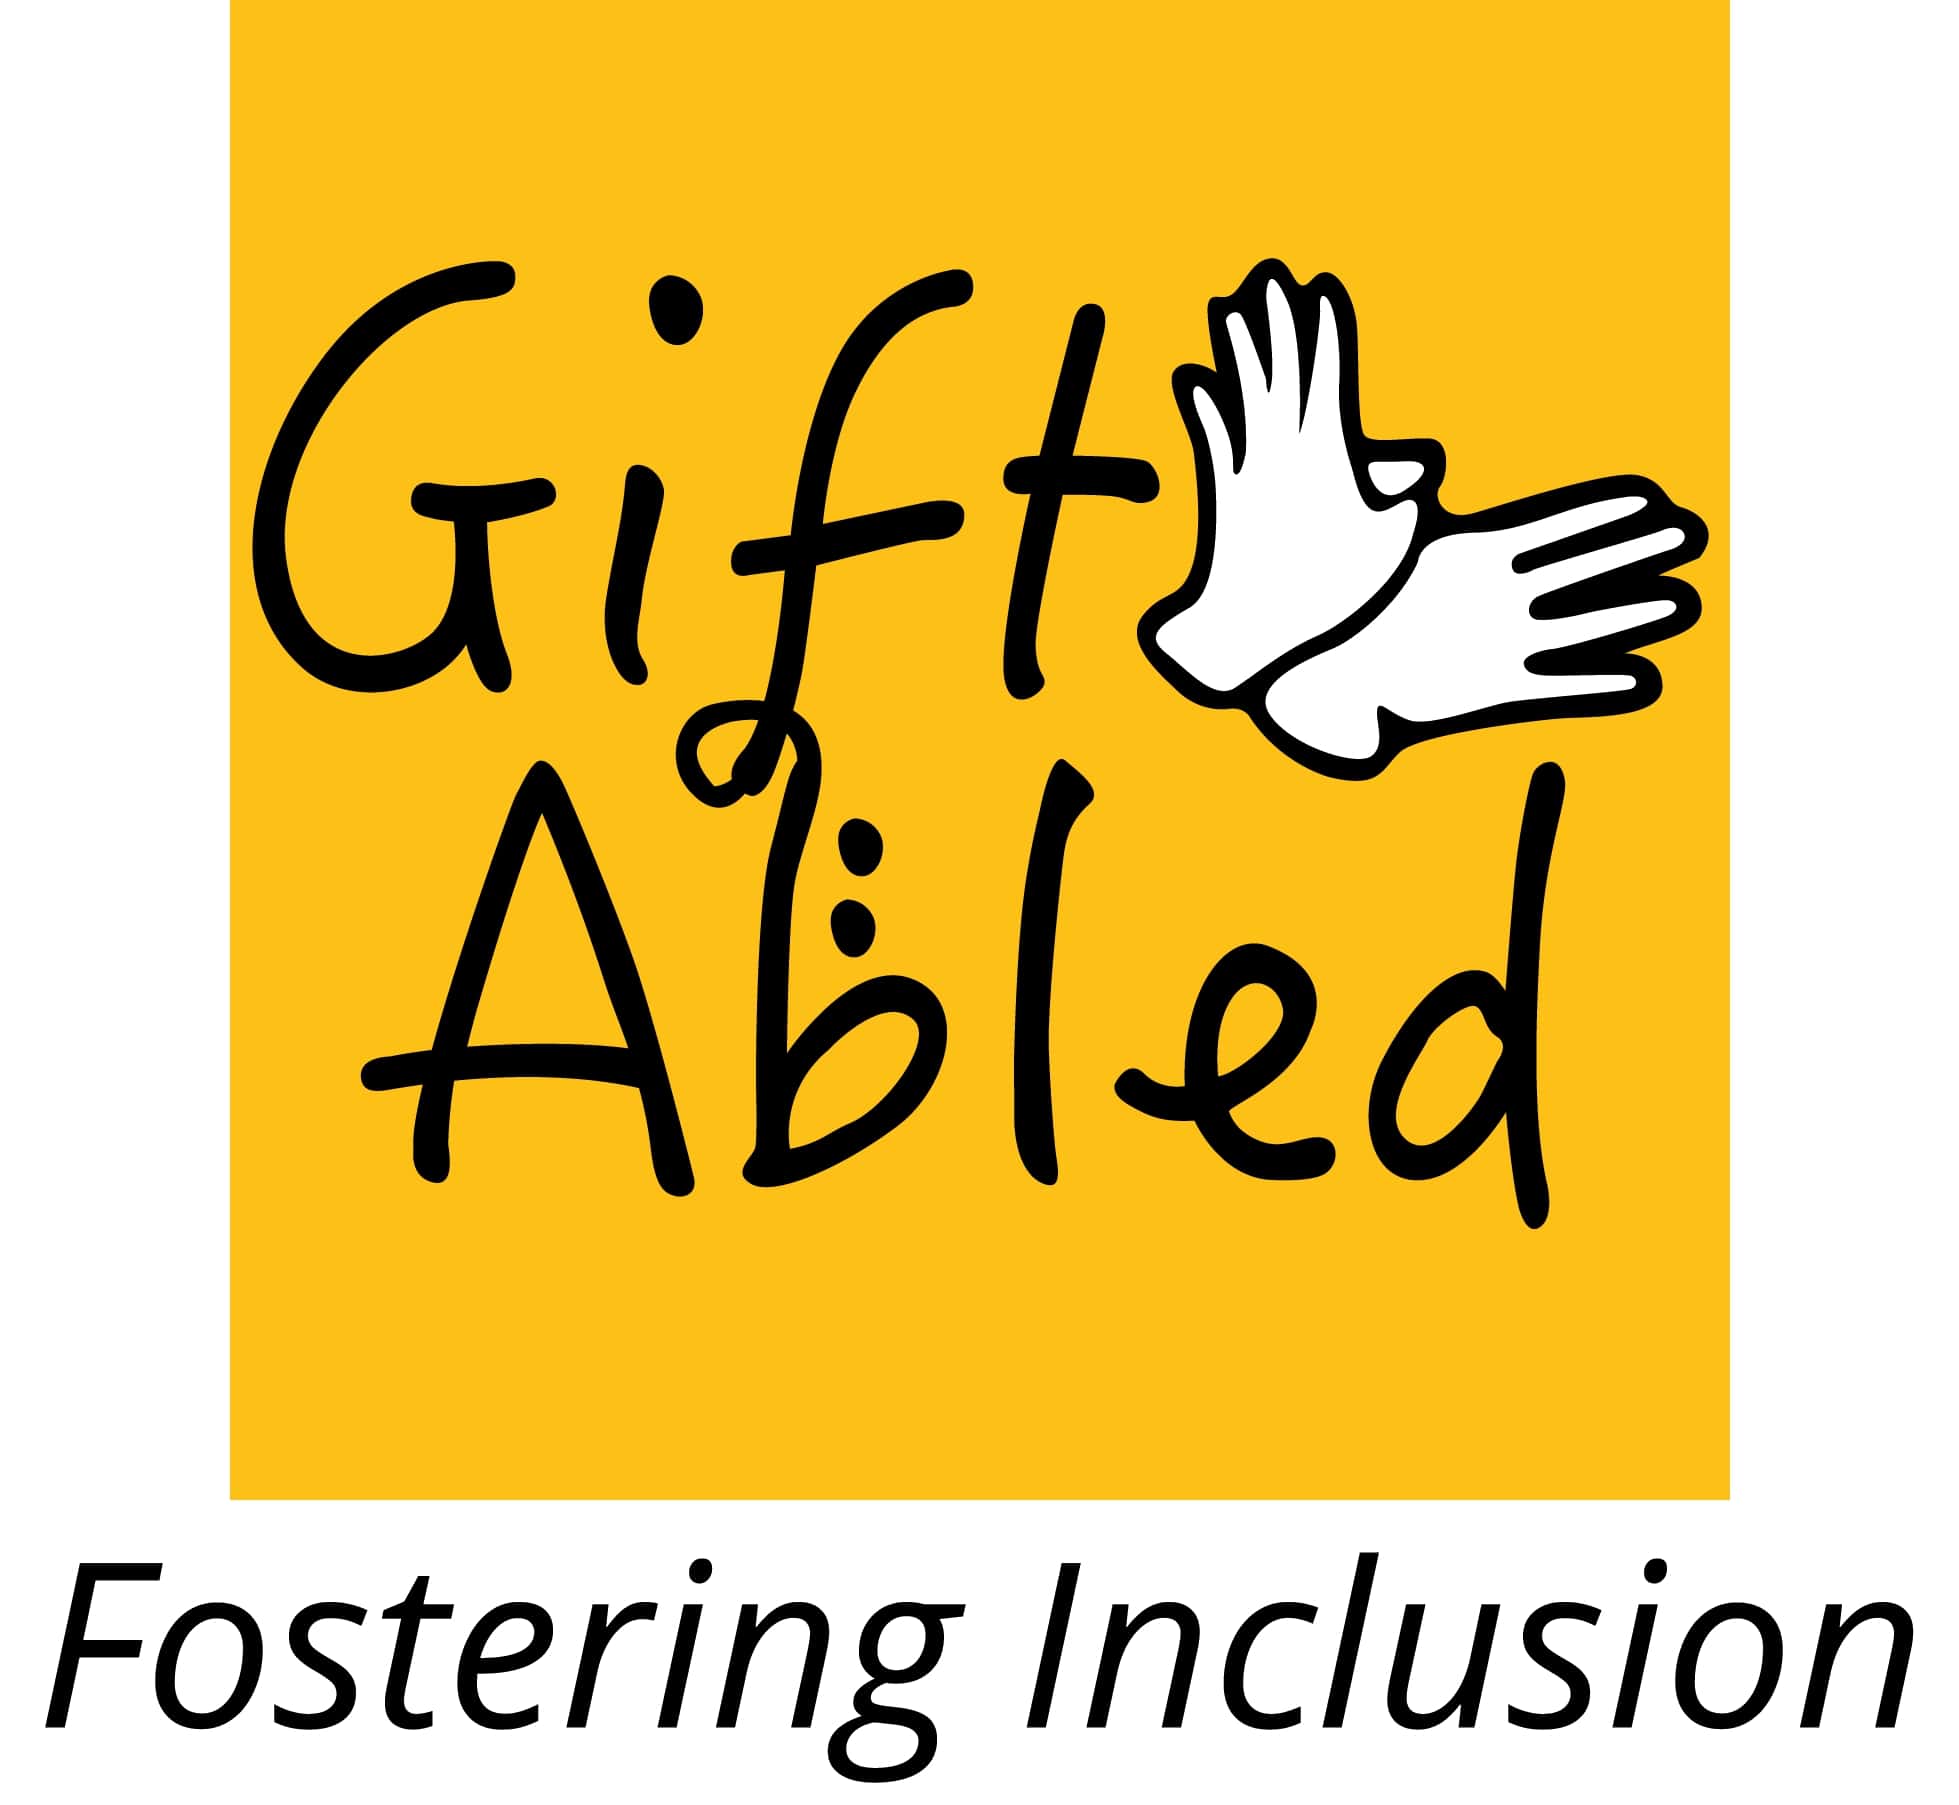 GiftAbled - Fostering Inclusion logo